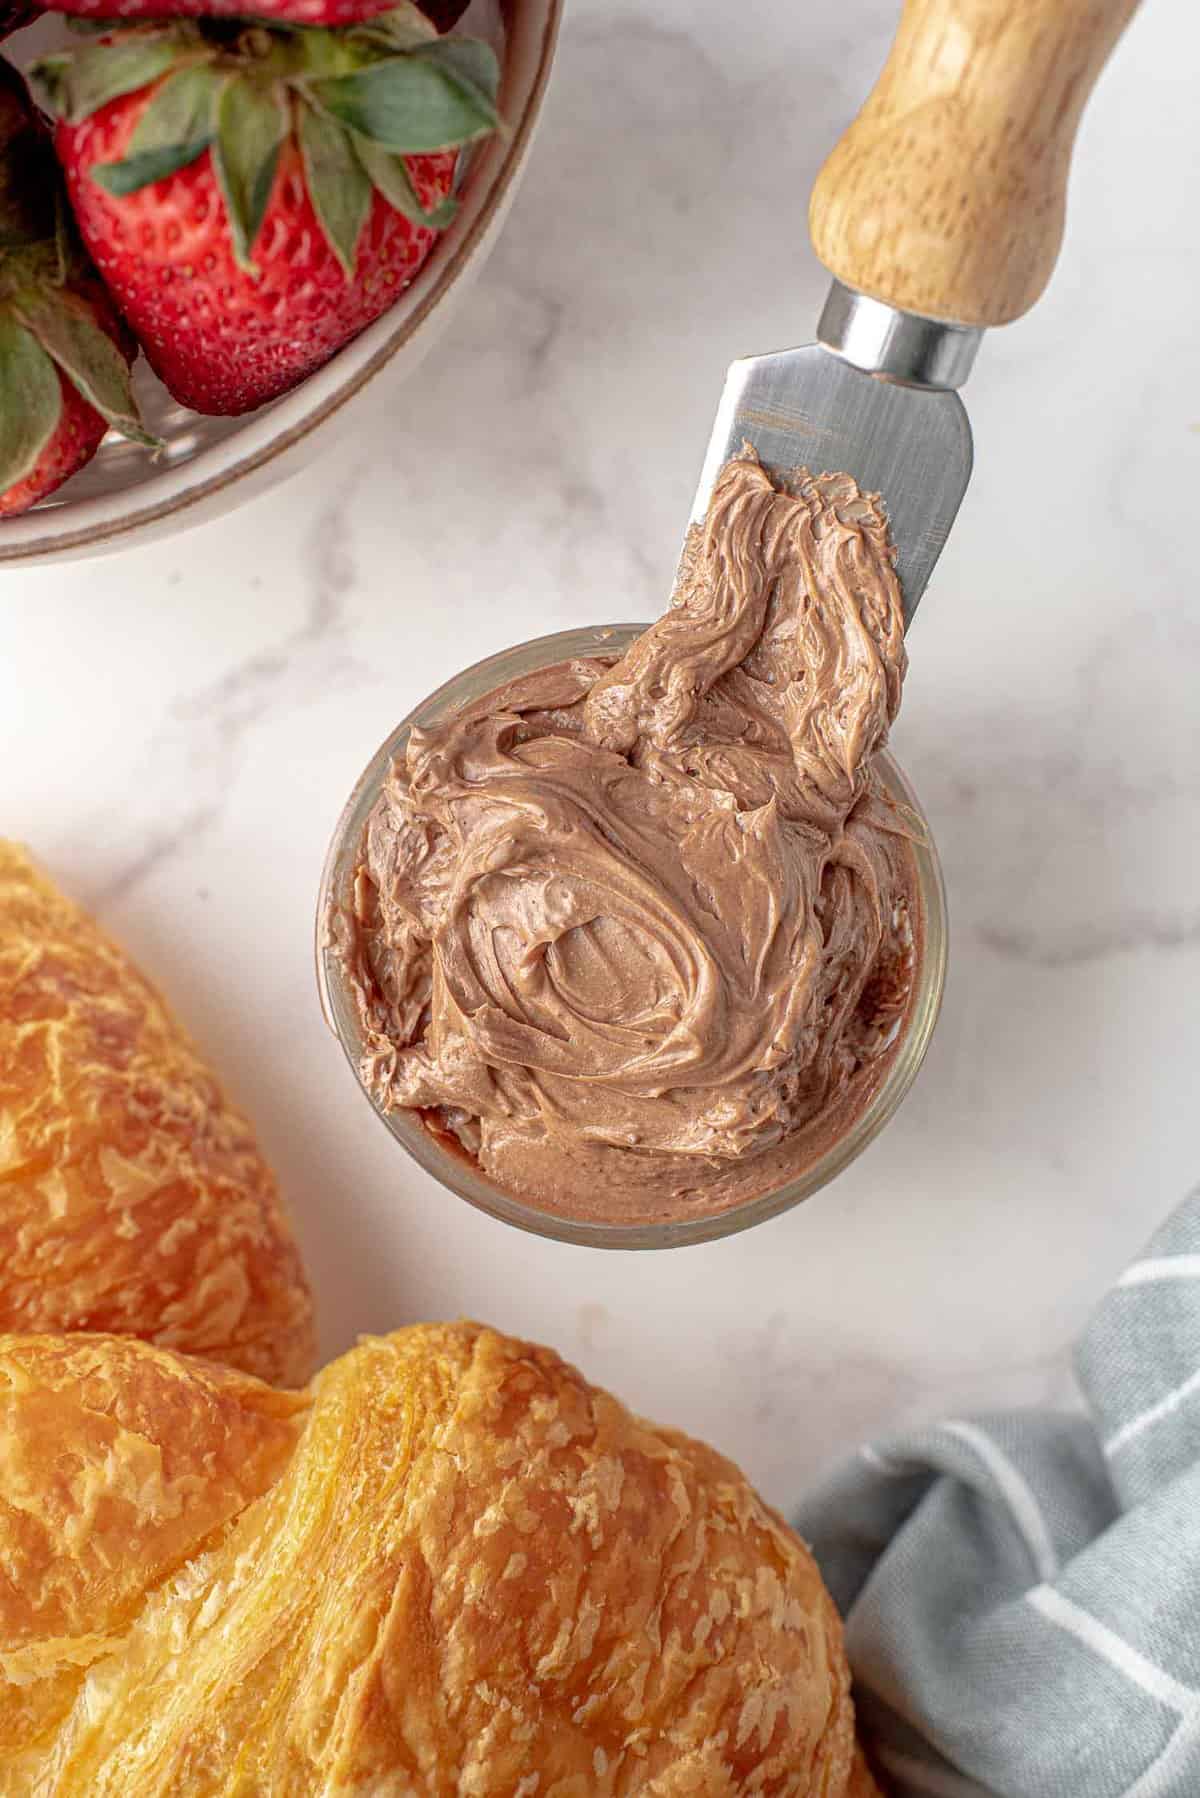 Chocolate butter in a small jar, croissants nearby.